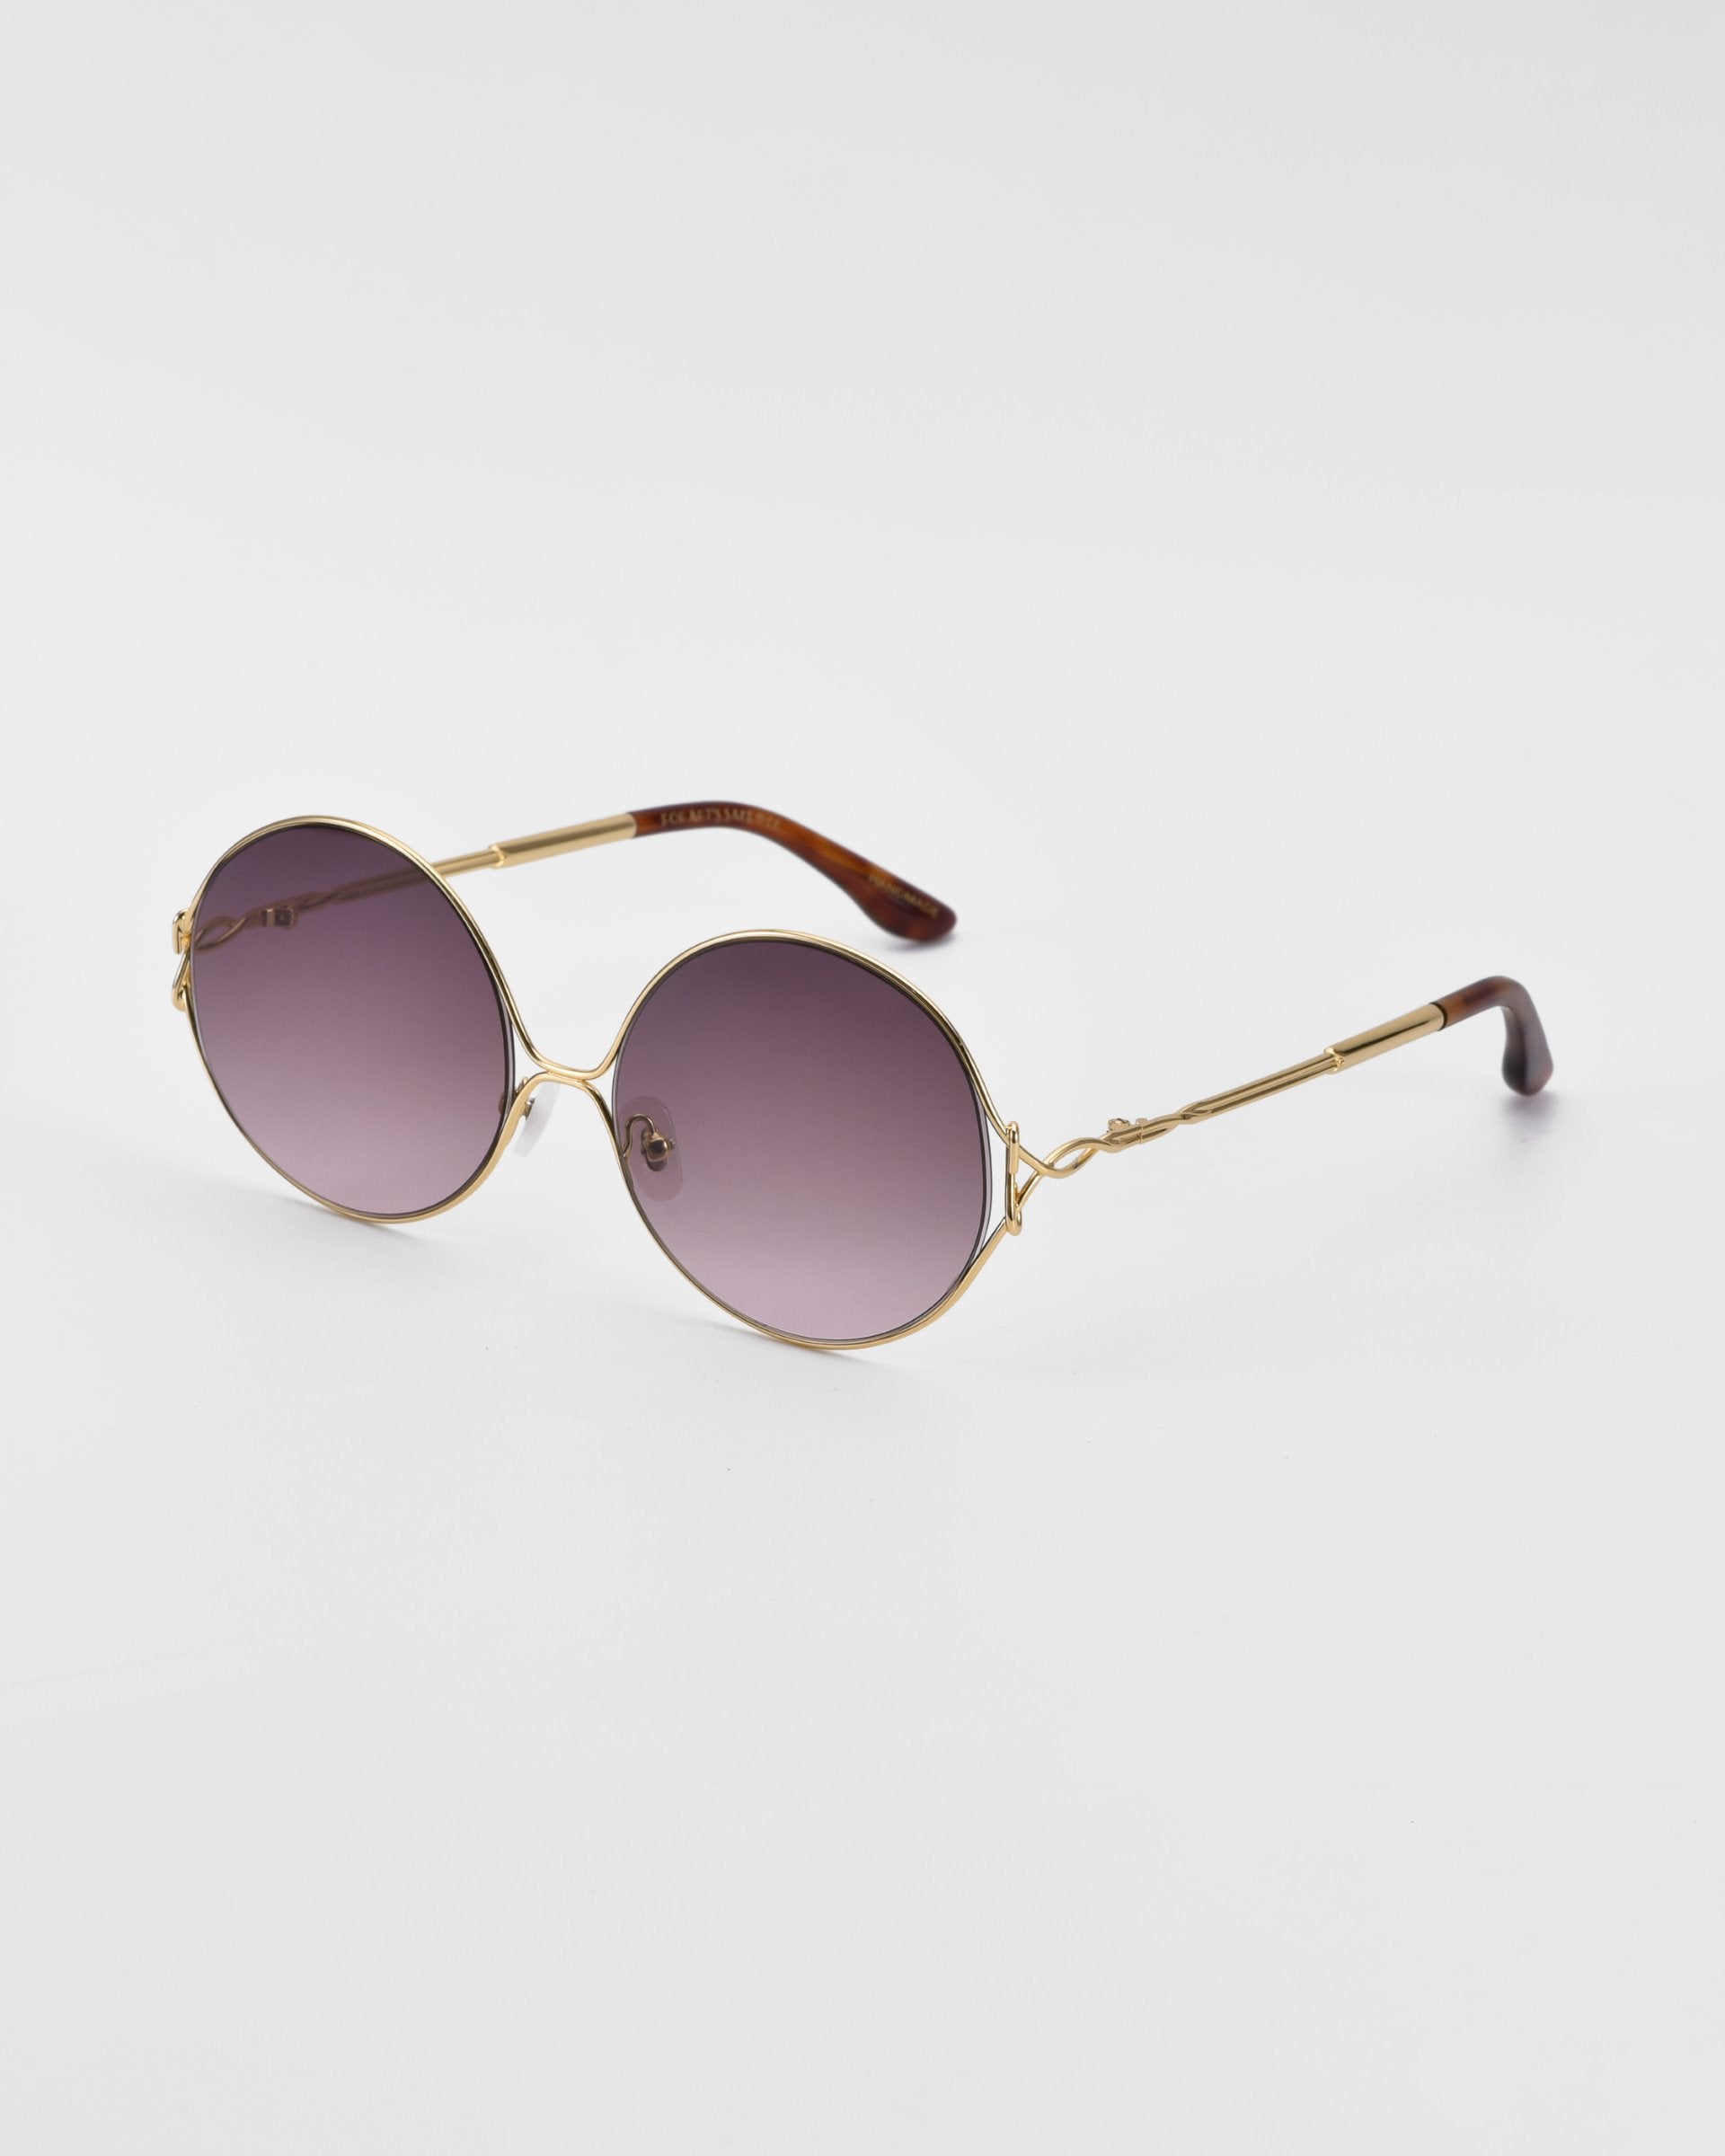 A pair of retro-inspired sunglasses with oversized round frames and a gold metal finish, featuring brown-tinted gradient lenses and tortoiseshell temples. The Aura by For Art's Sake® is positioned at an angle on a seamless white background.